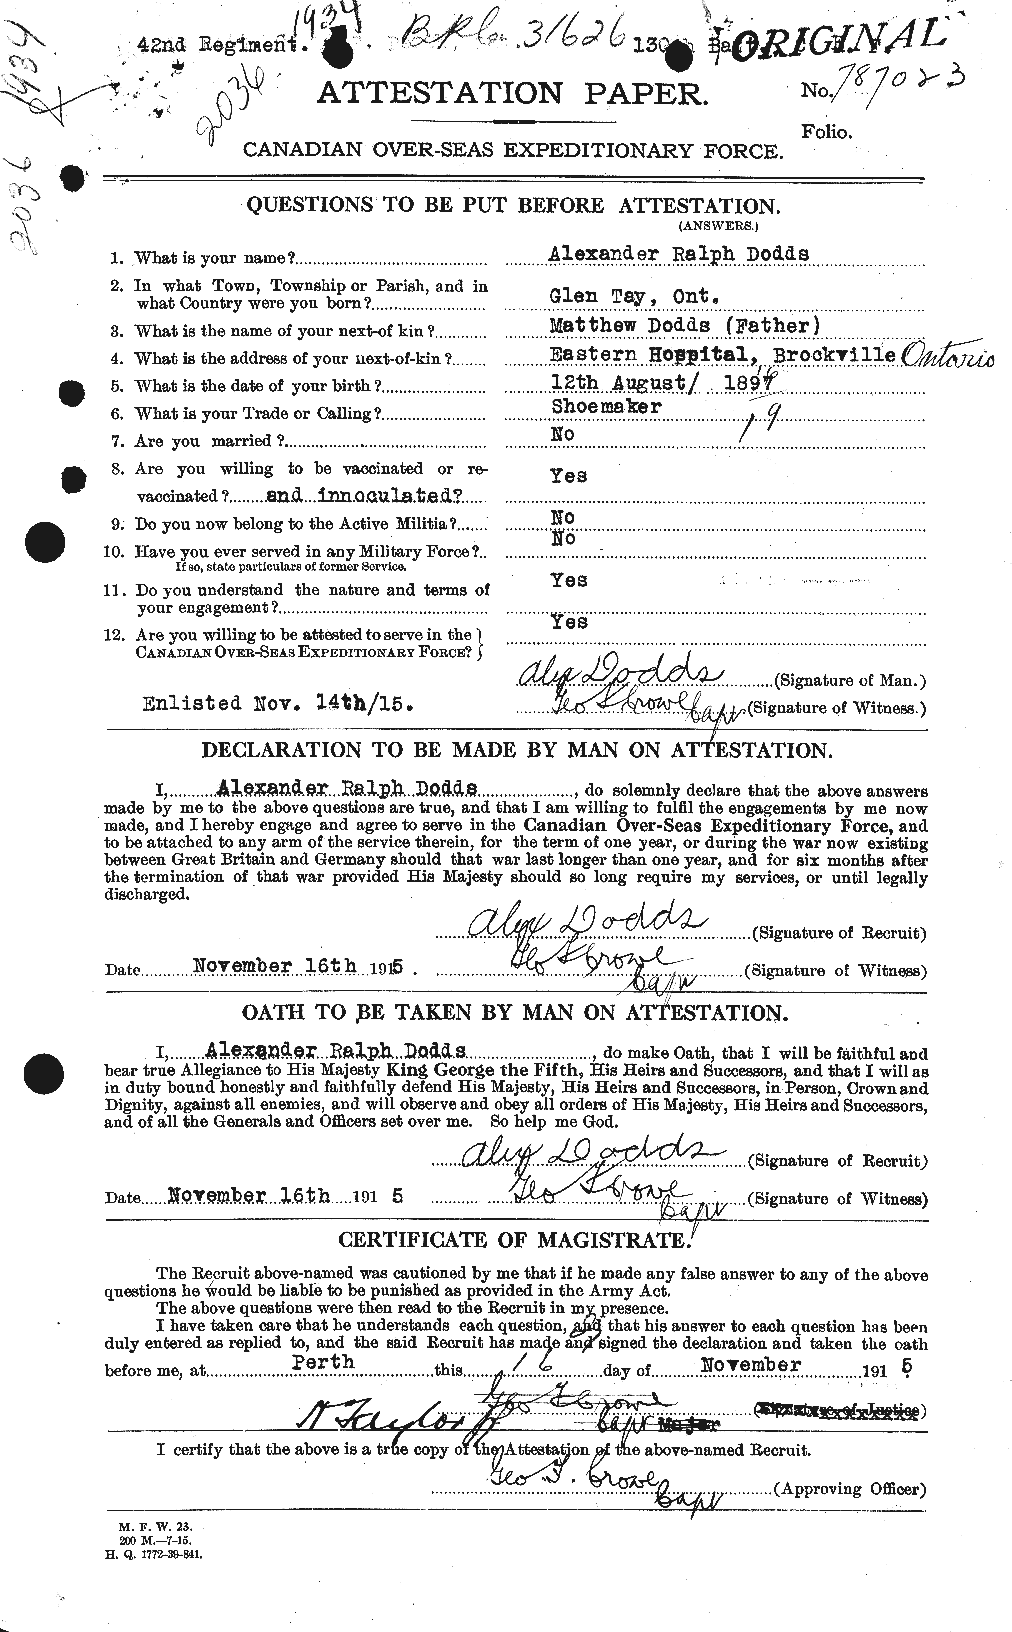 Personnel Records of the First World War - CEF 294347a